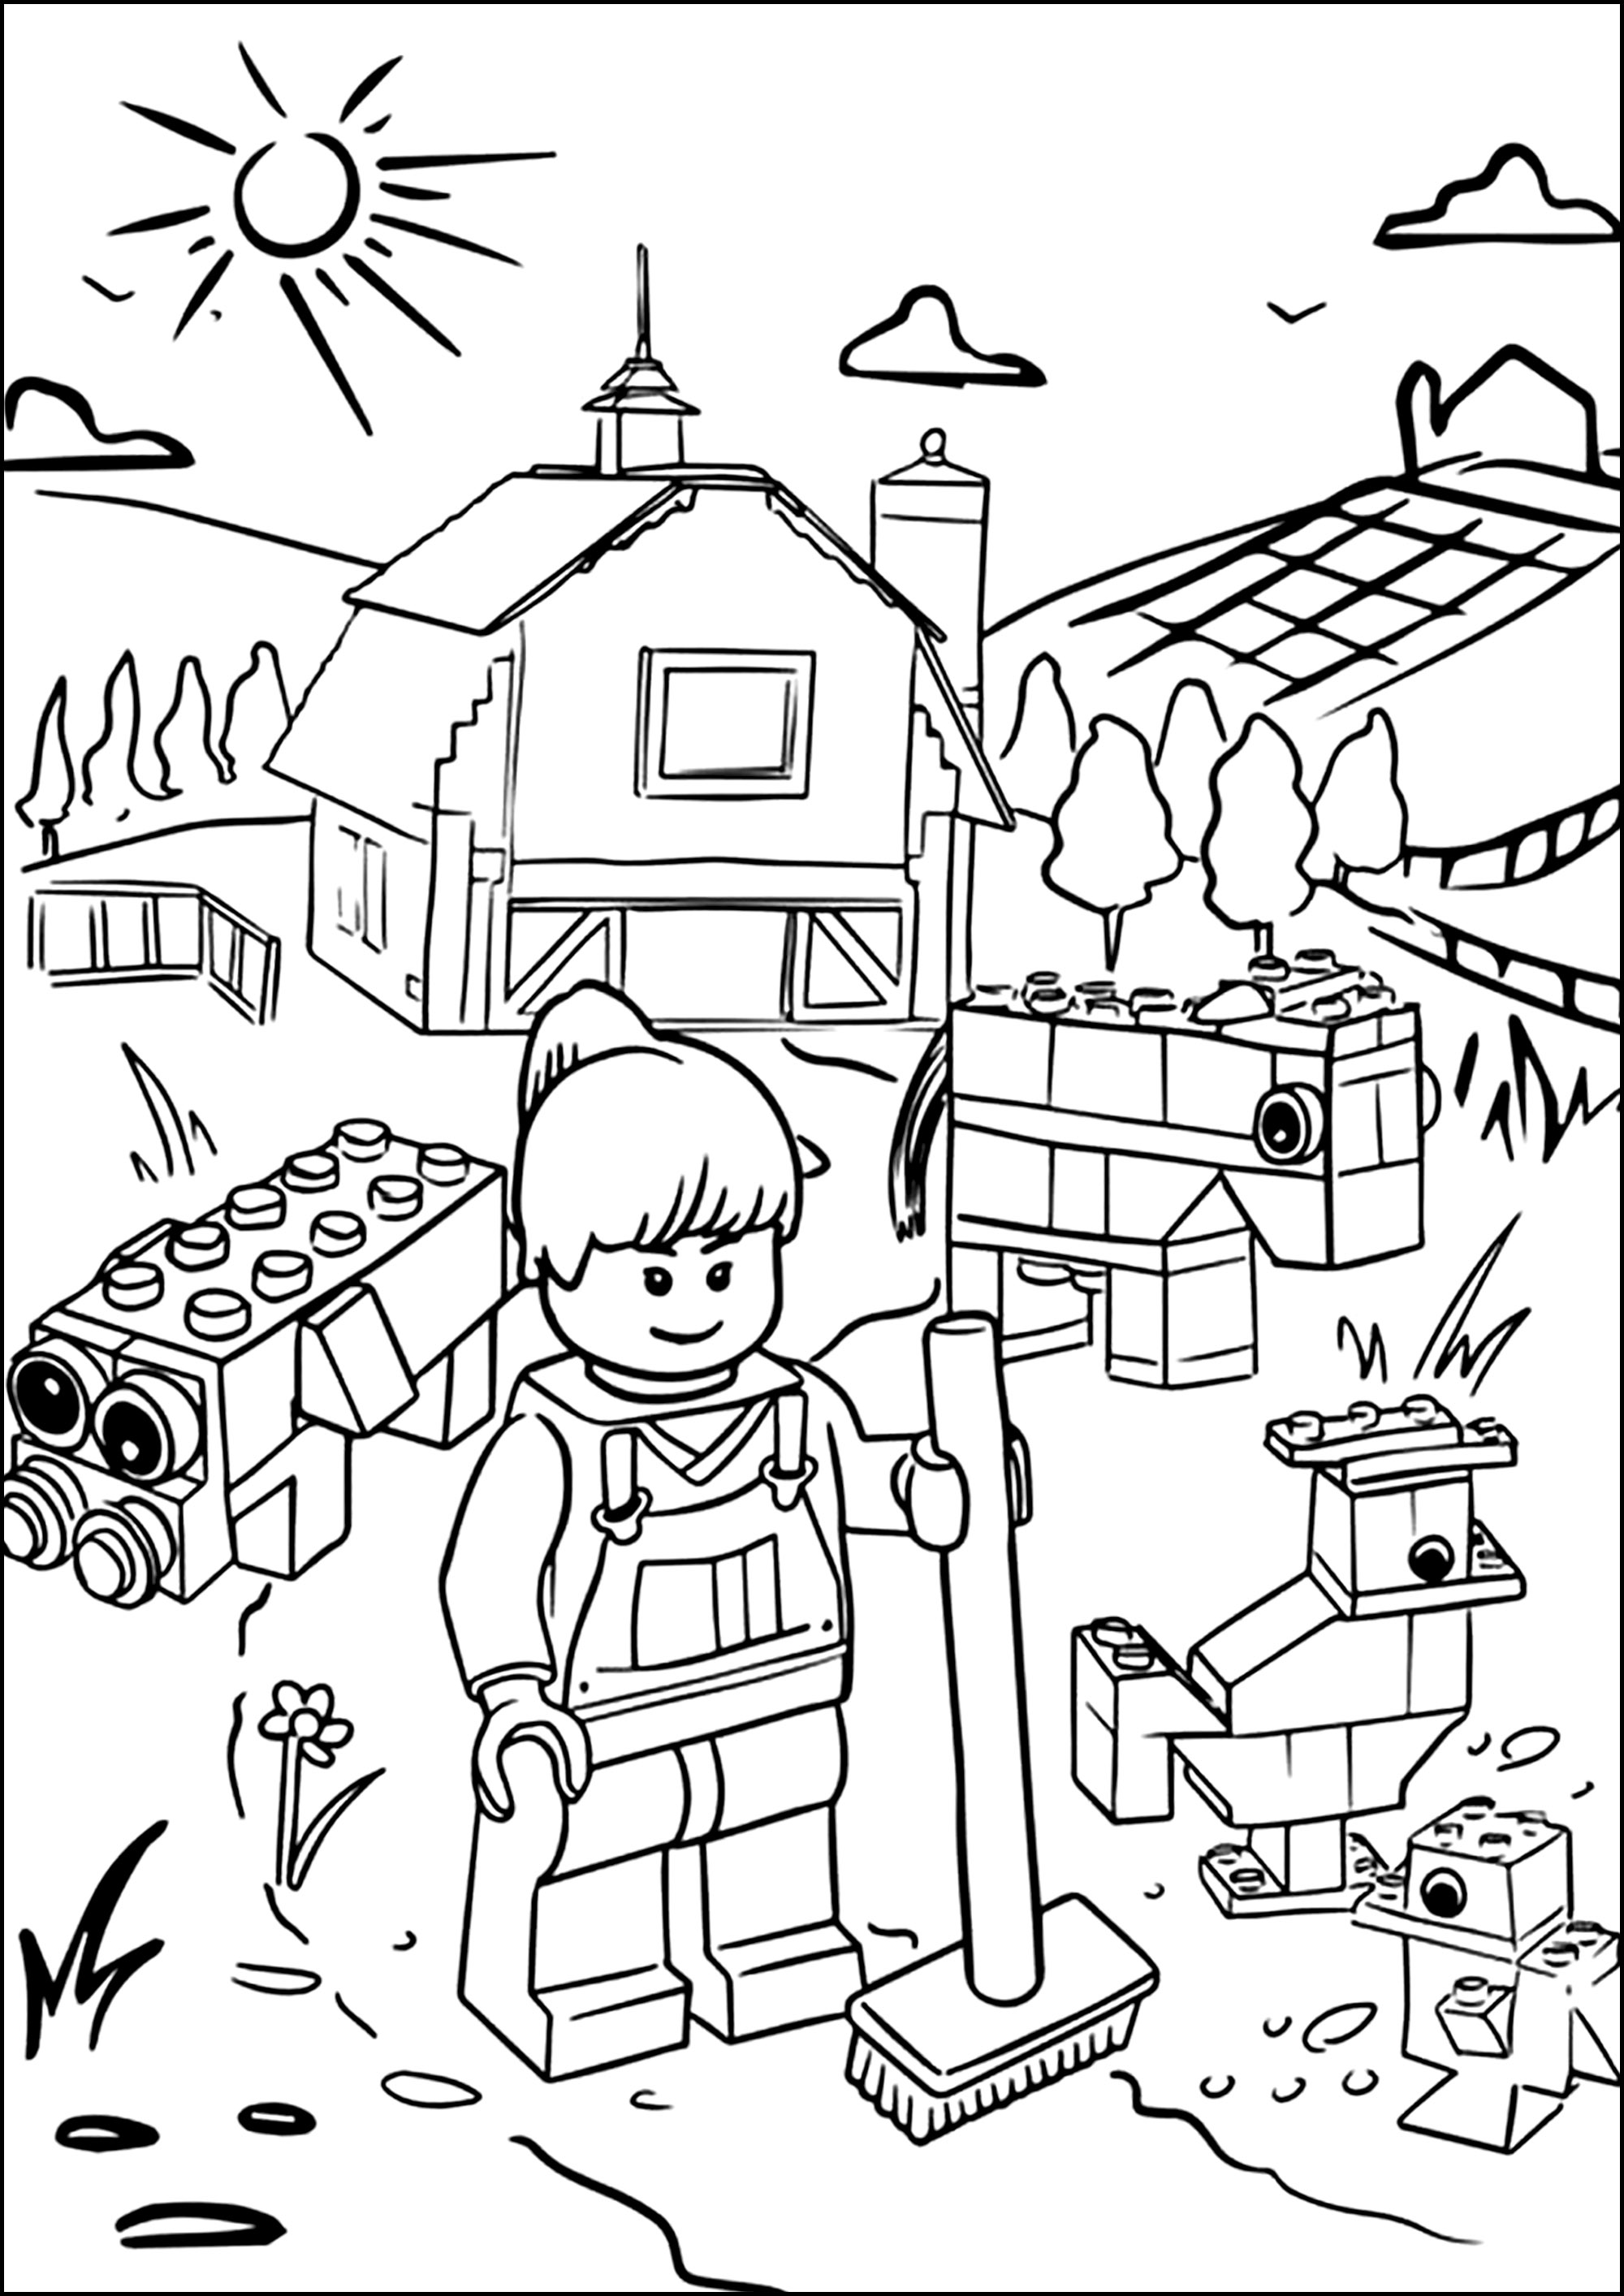 Cute free Lego coloring page to download